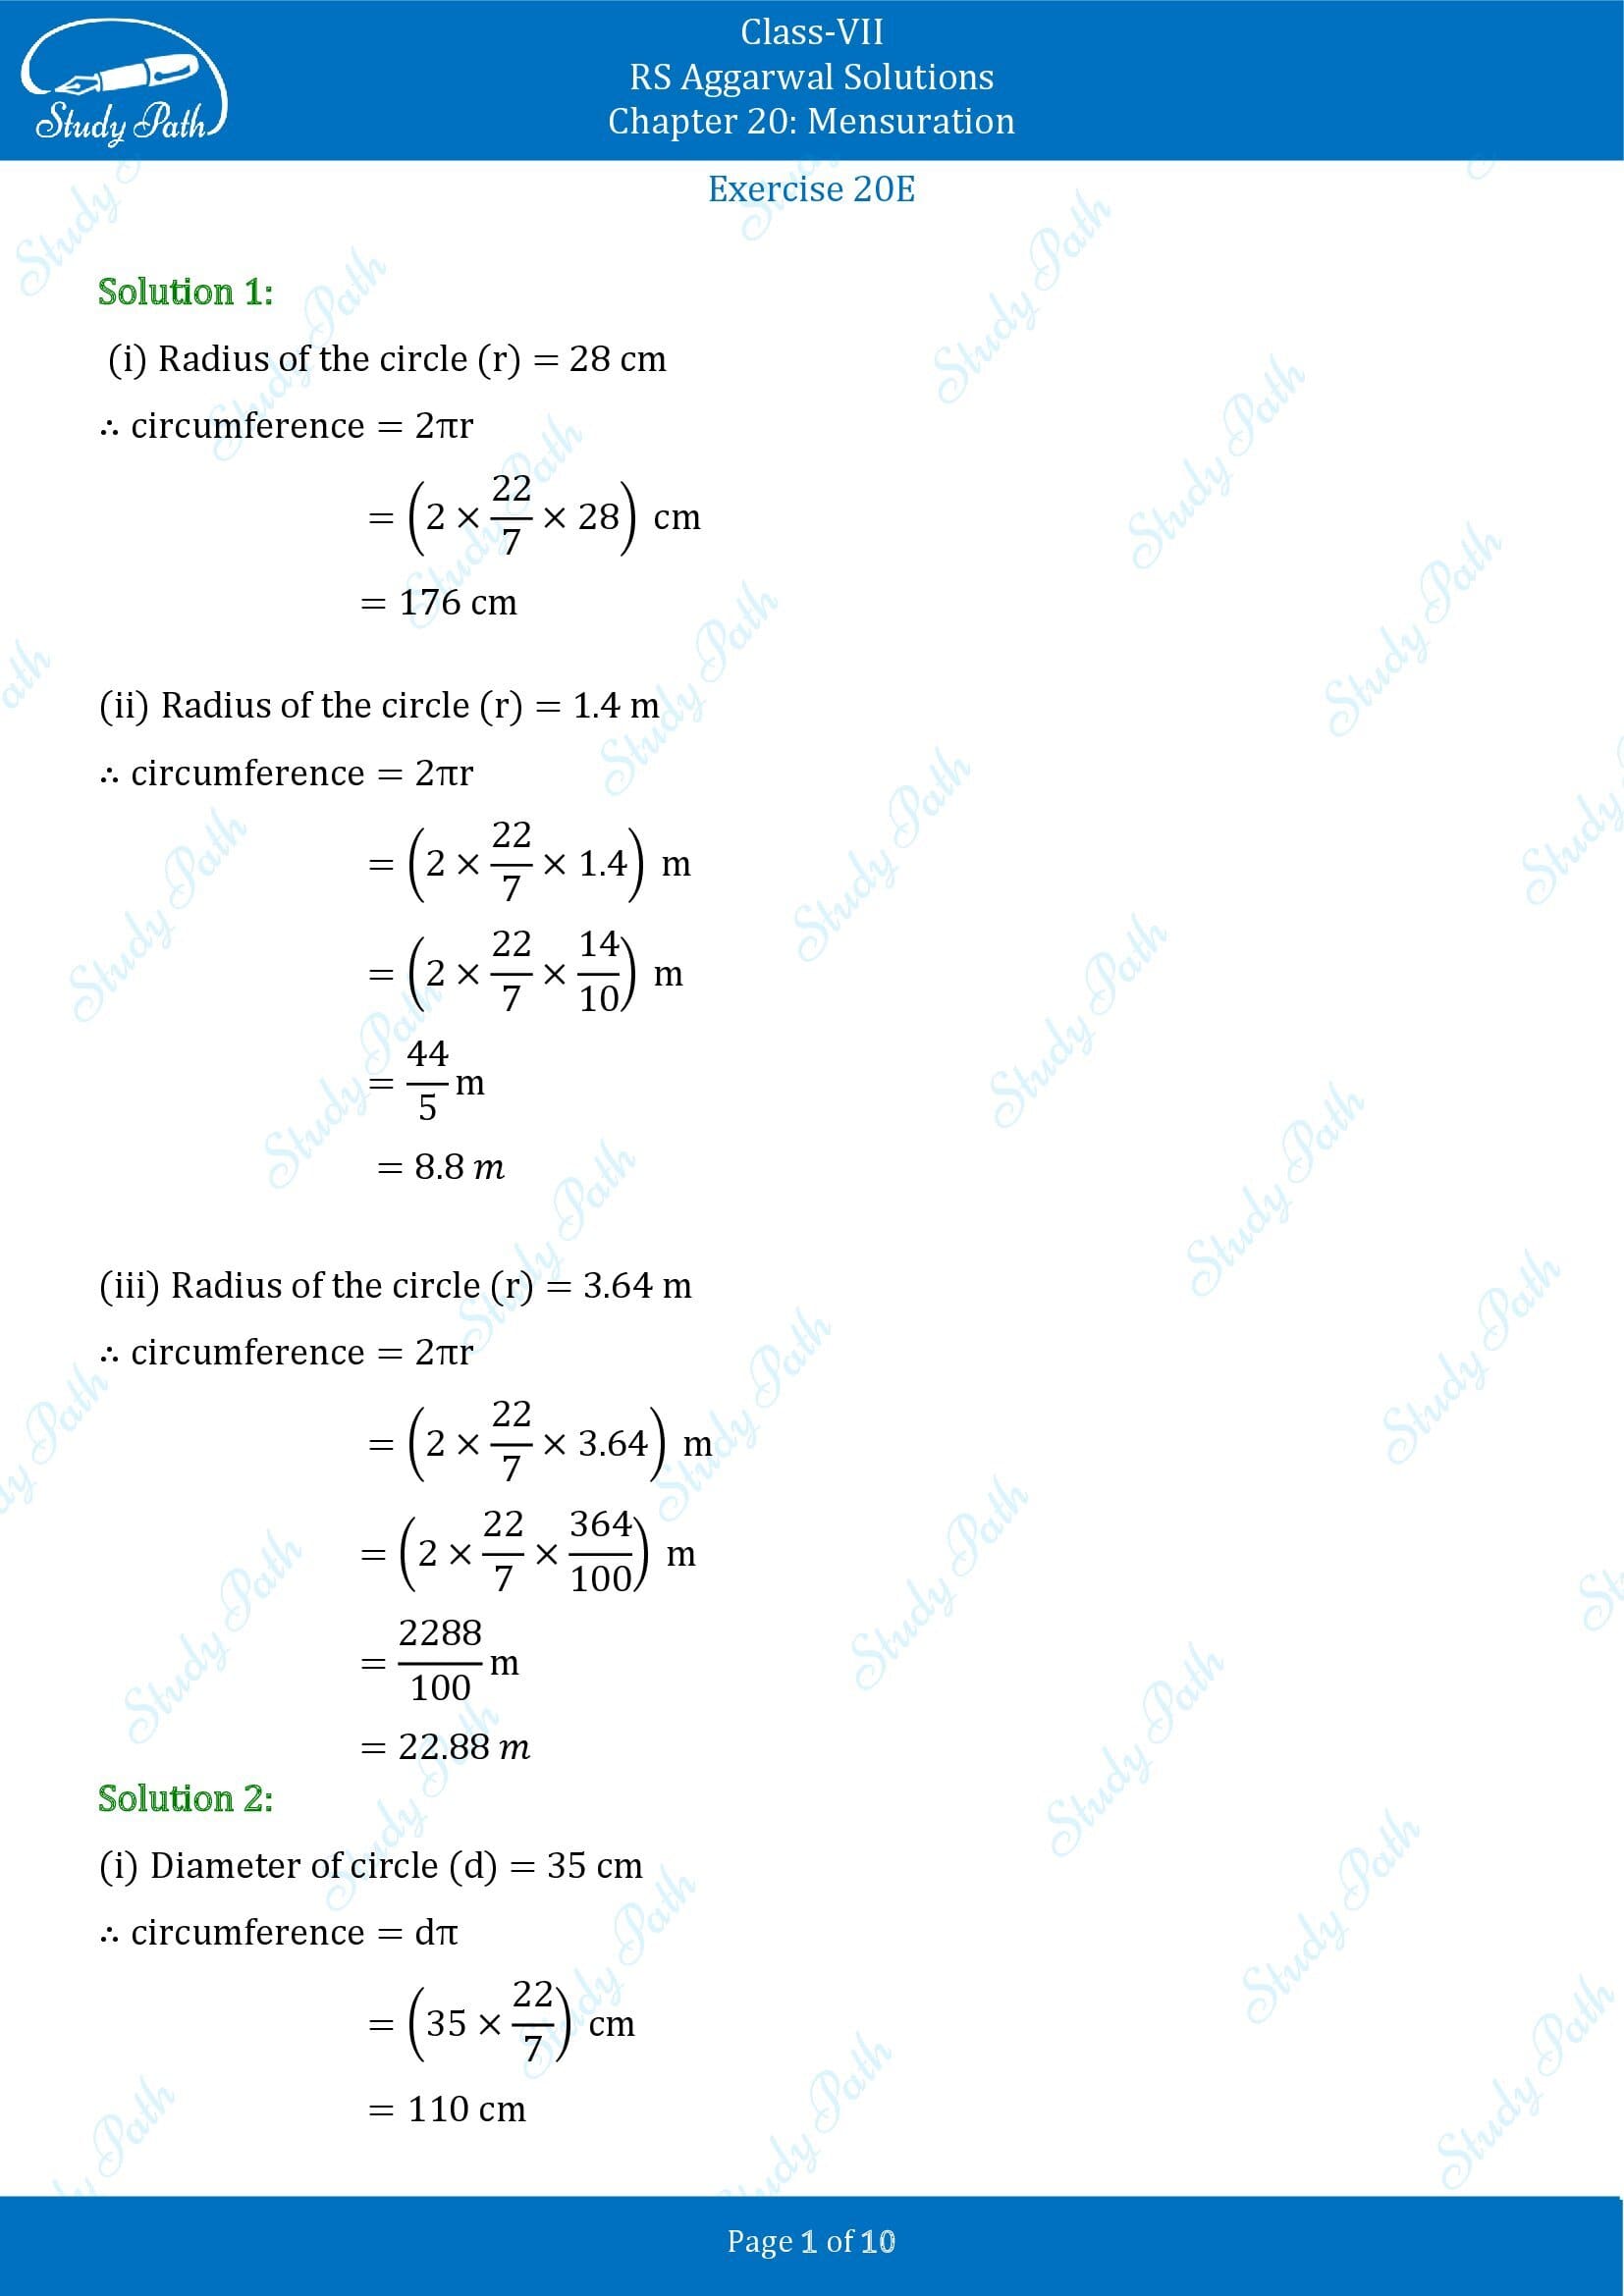 RS Aggarwal Solutions Class 7 Chapter 20 Mensuration Exercise 20E 00001